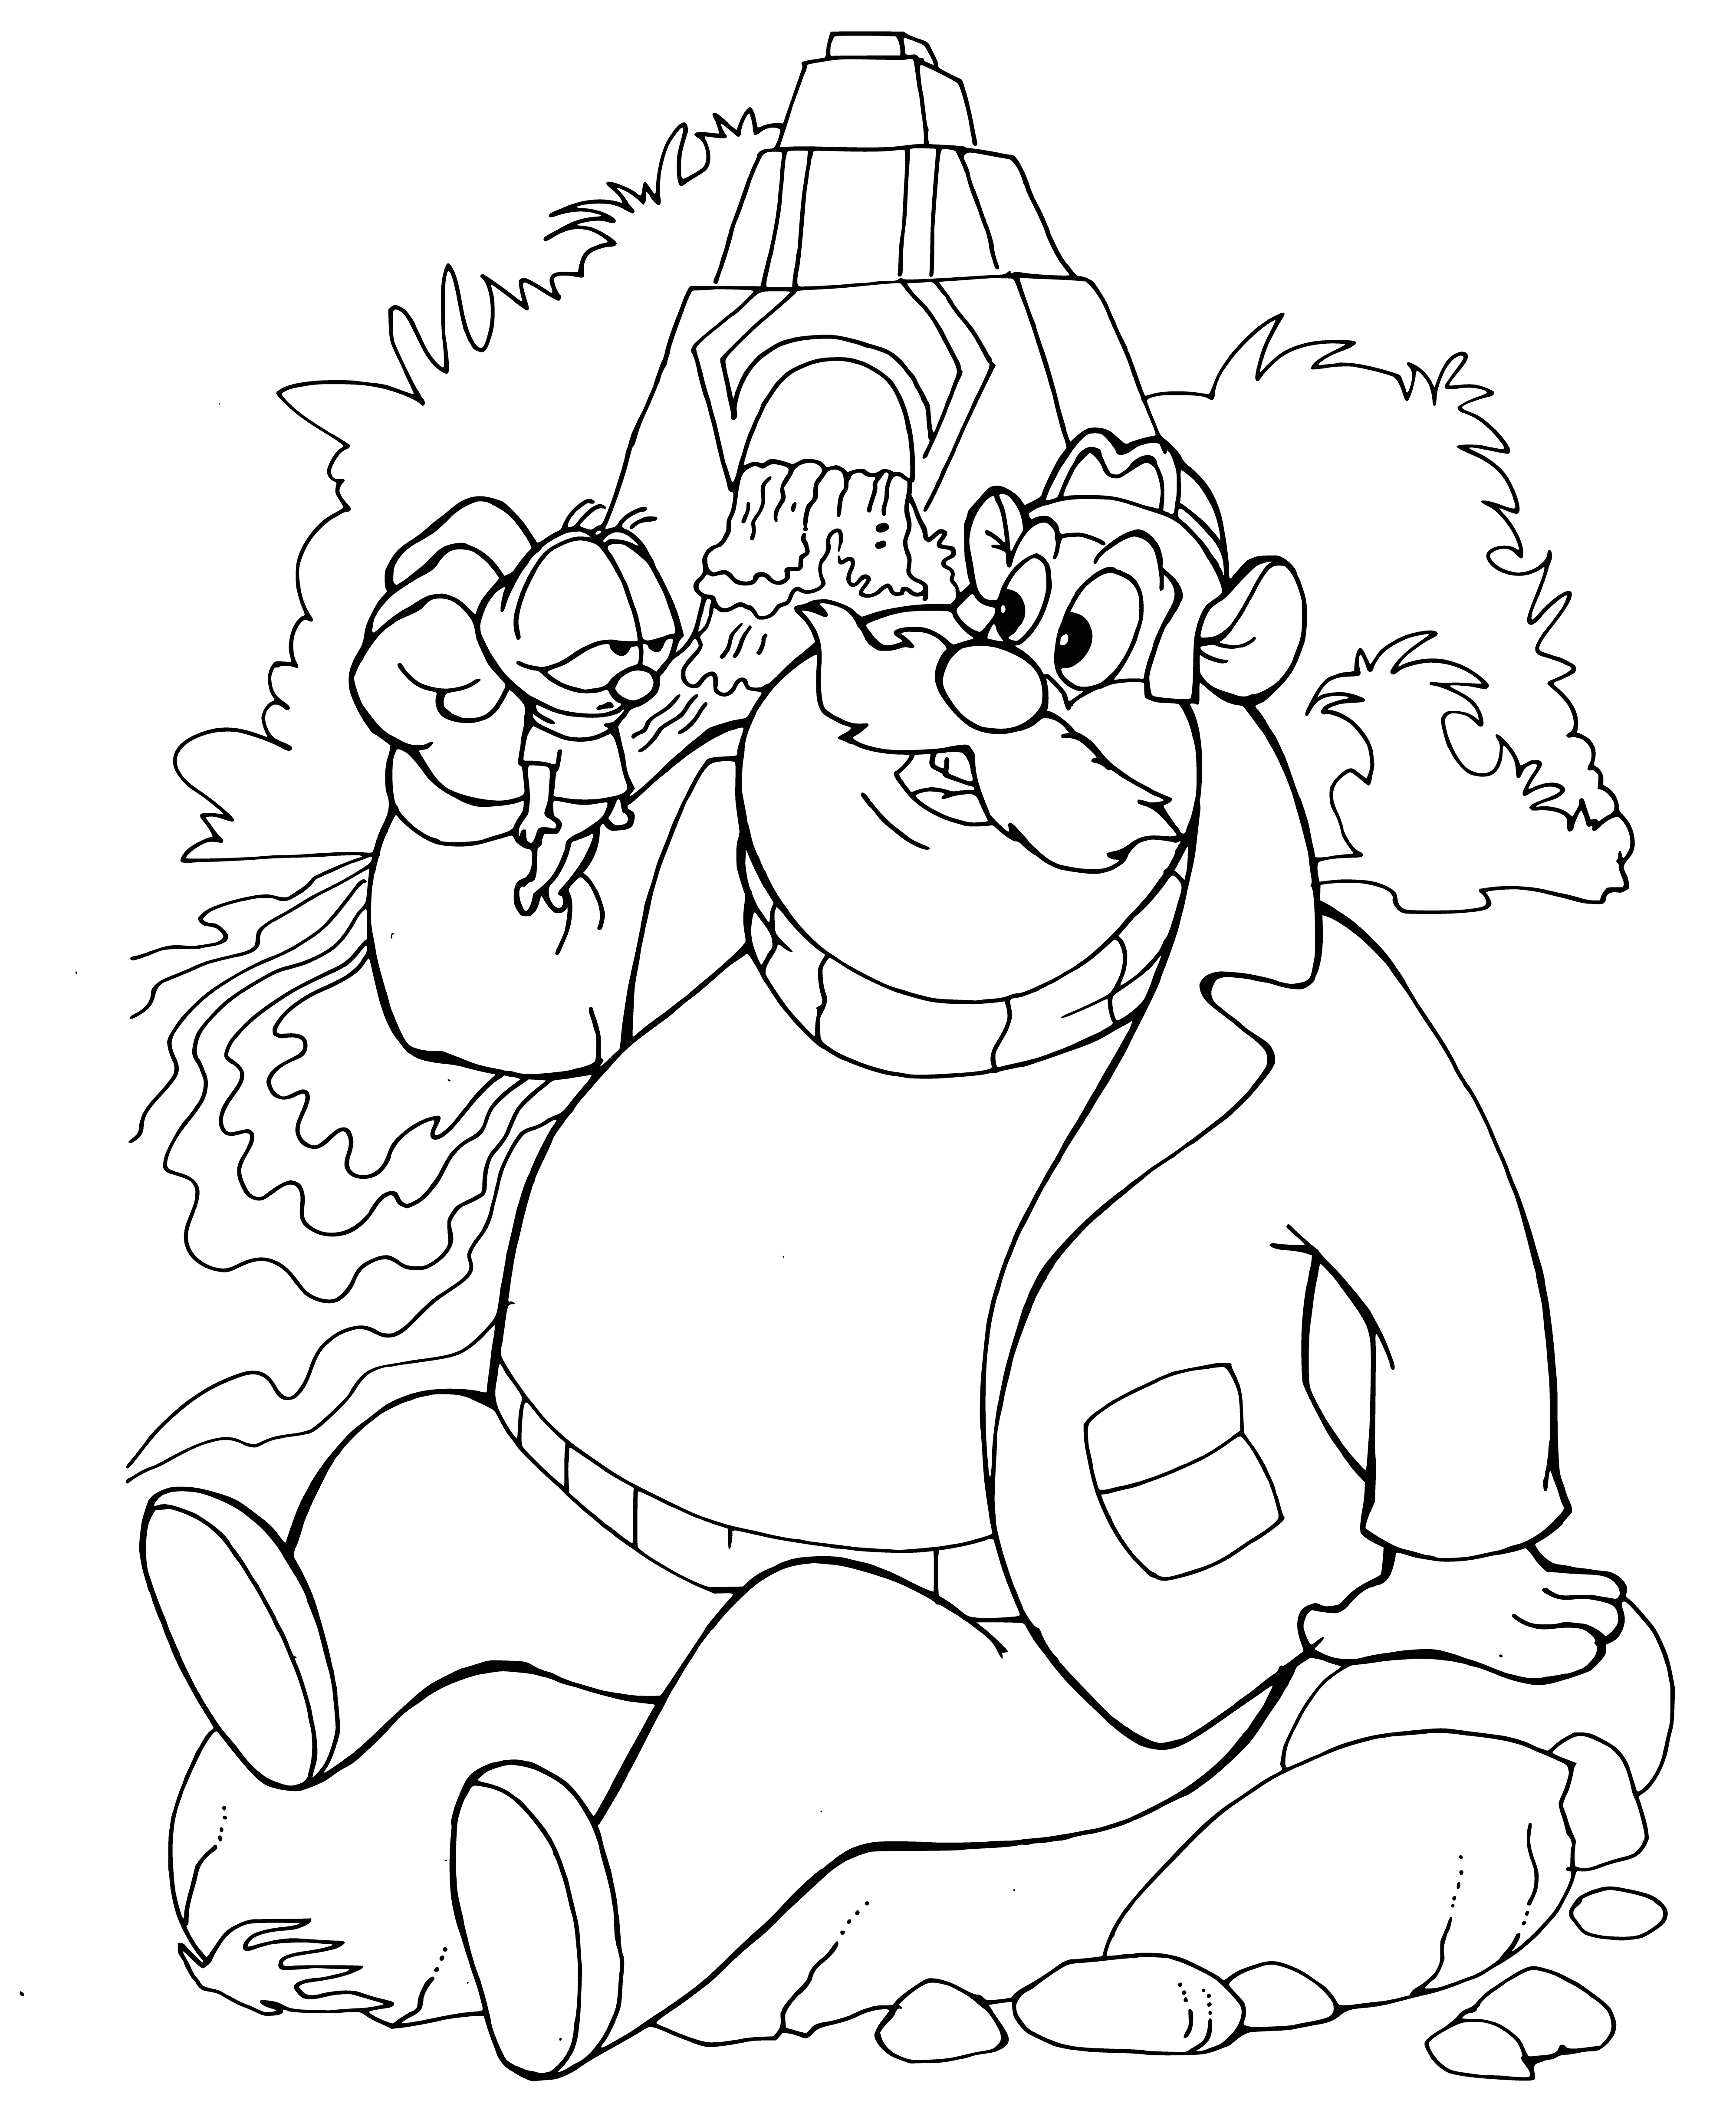 coloring page: Roquefort & Vzhik from the Rescue Rangers are on the page, Roquefort with orange fur & black spots, Vzhik blue with large eyes and holding Roquefort's tail.